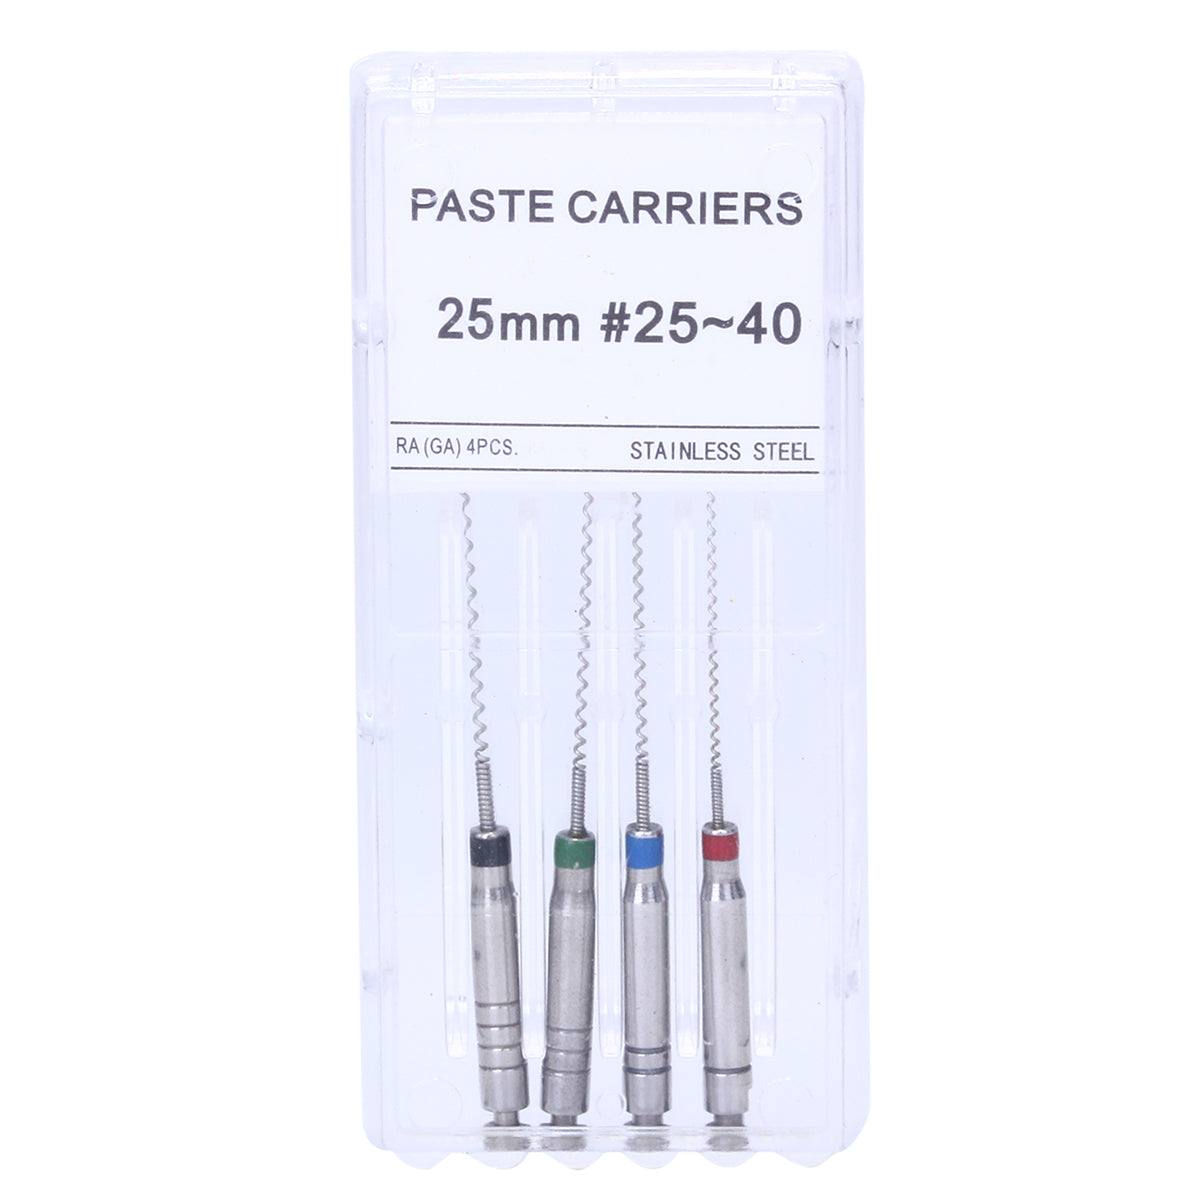 Endo Rotary Paste Carriers Stainless Steel 25mm Assorted #25-40 4pcs/Pk - pairaydental.com